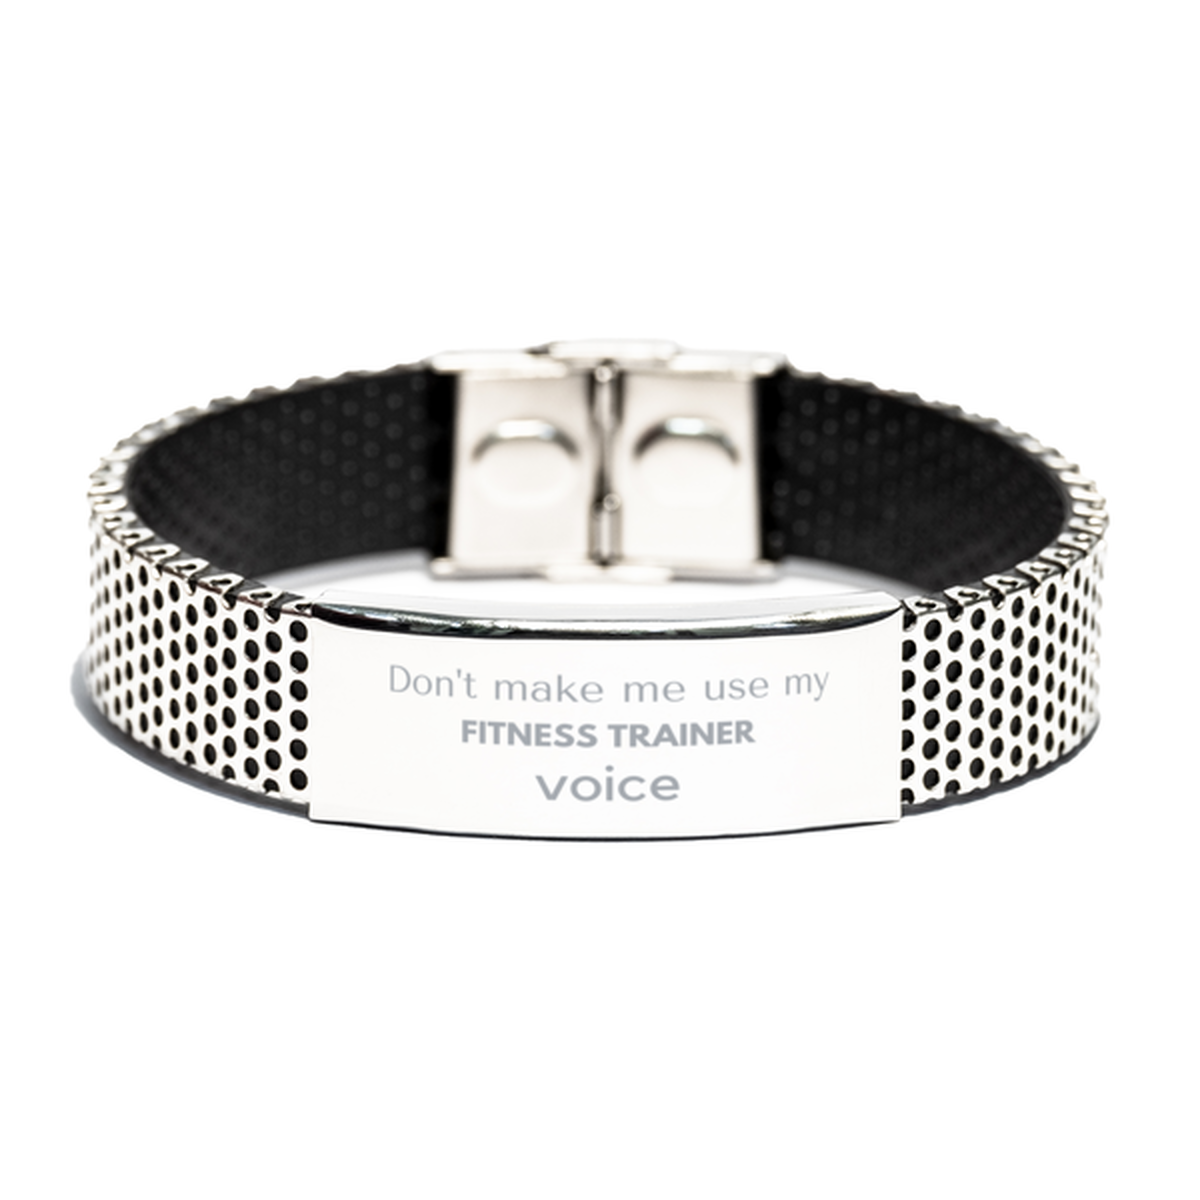 Don't make me use my Fitness Trainer voice, Sarcasm Fitness Trainer Gifts, Christmas Fitness Trainer Stainless Steel Bracelet Birthday Unique Gifts For Fitness Trainer Coworkers, Men, Women, Colleague, Friends